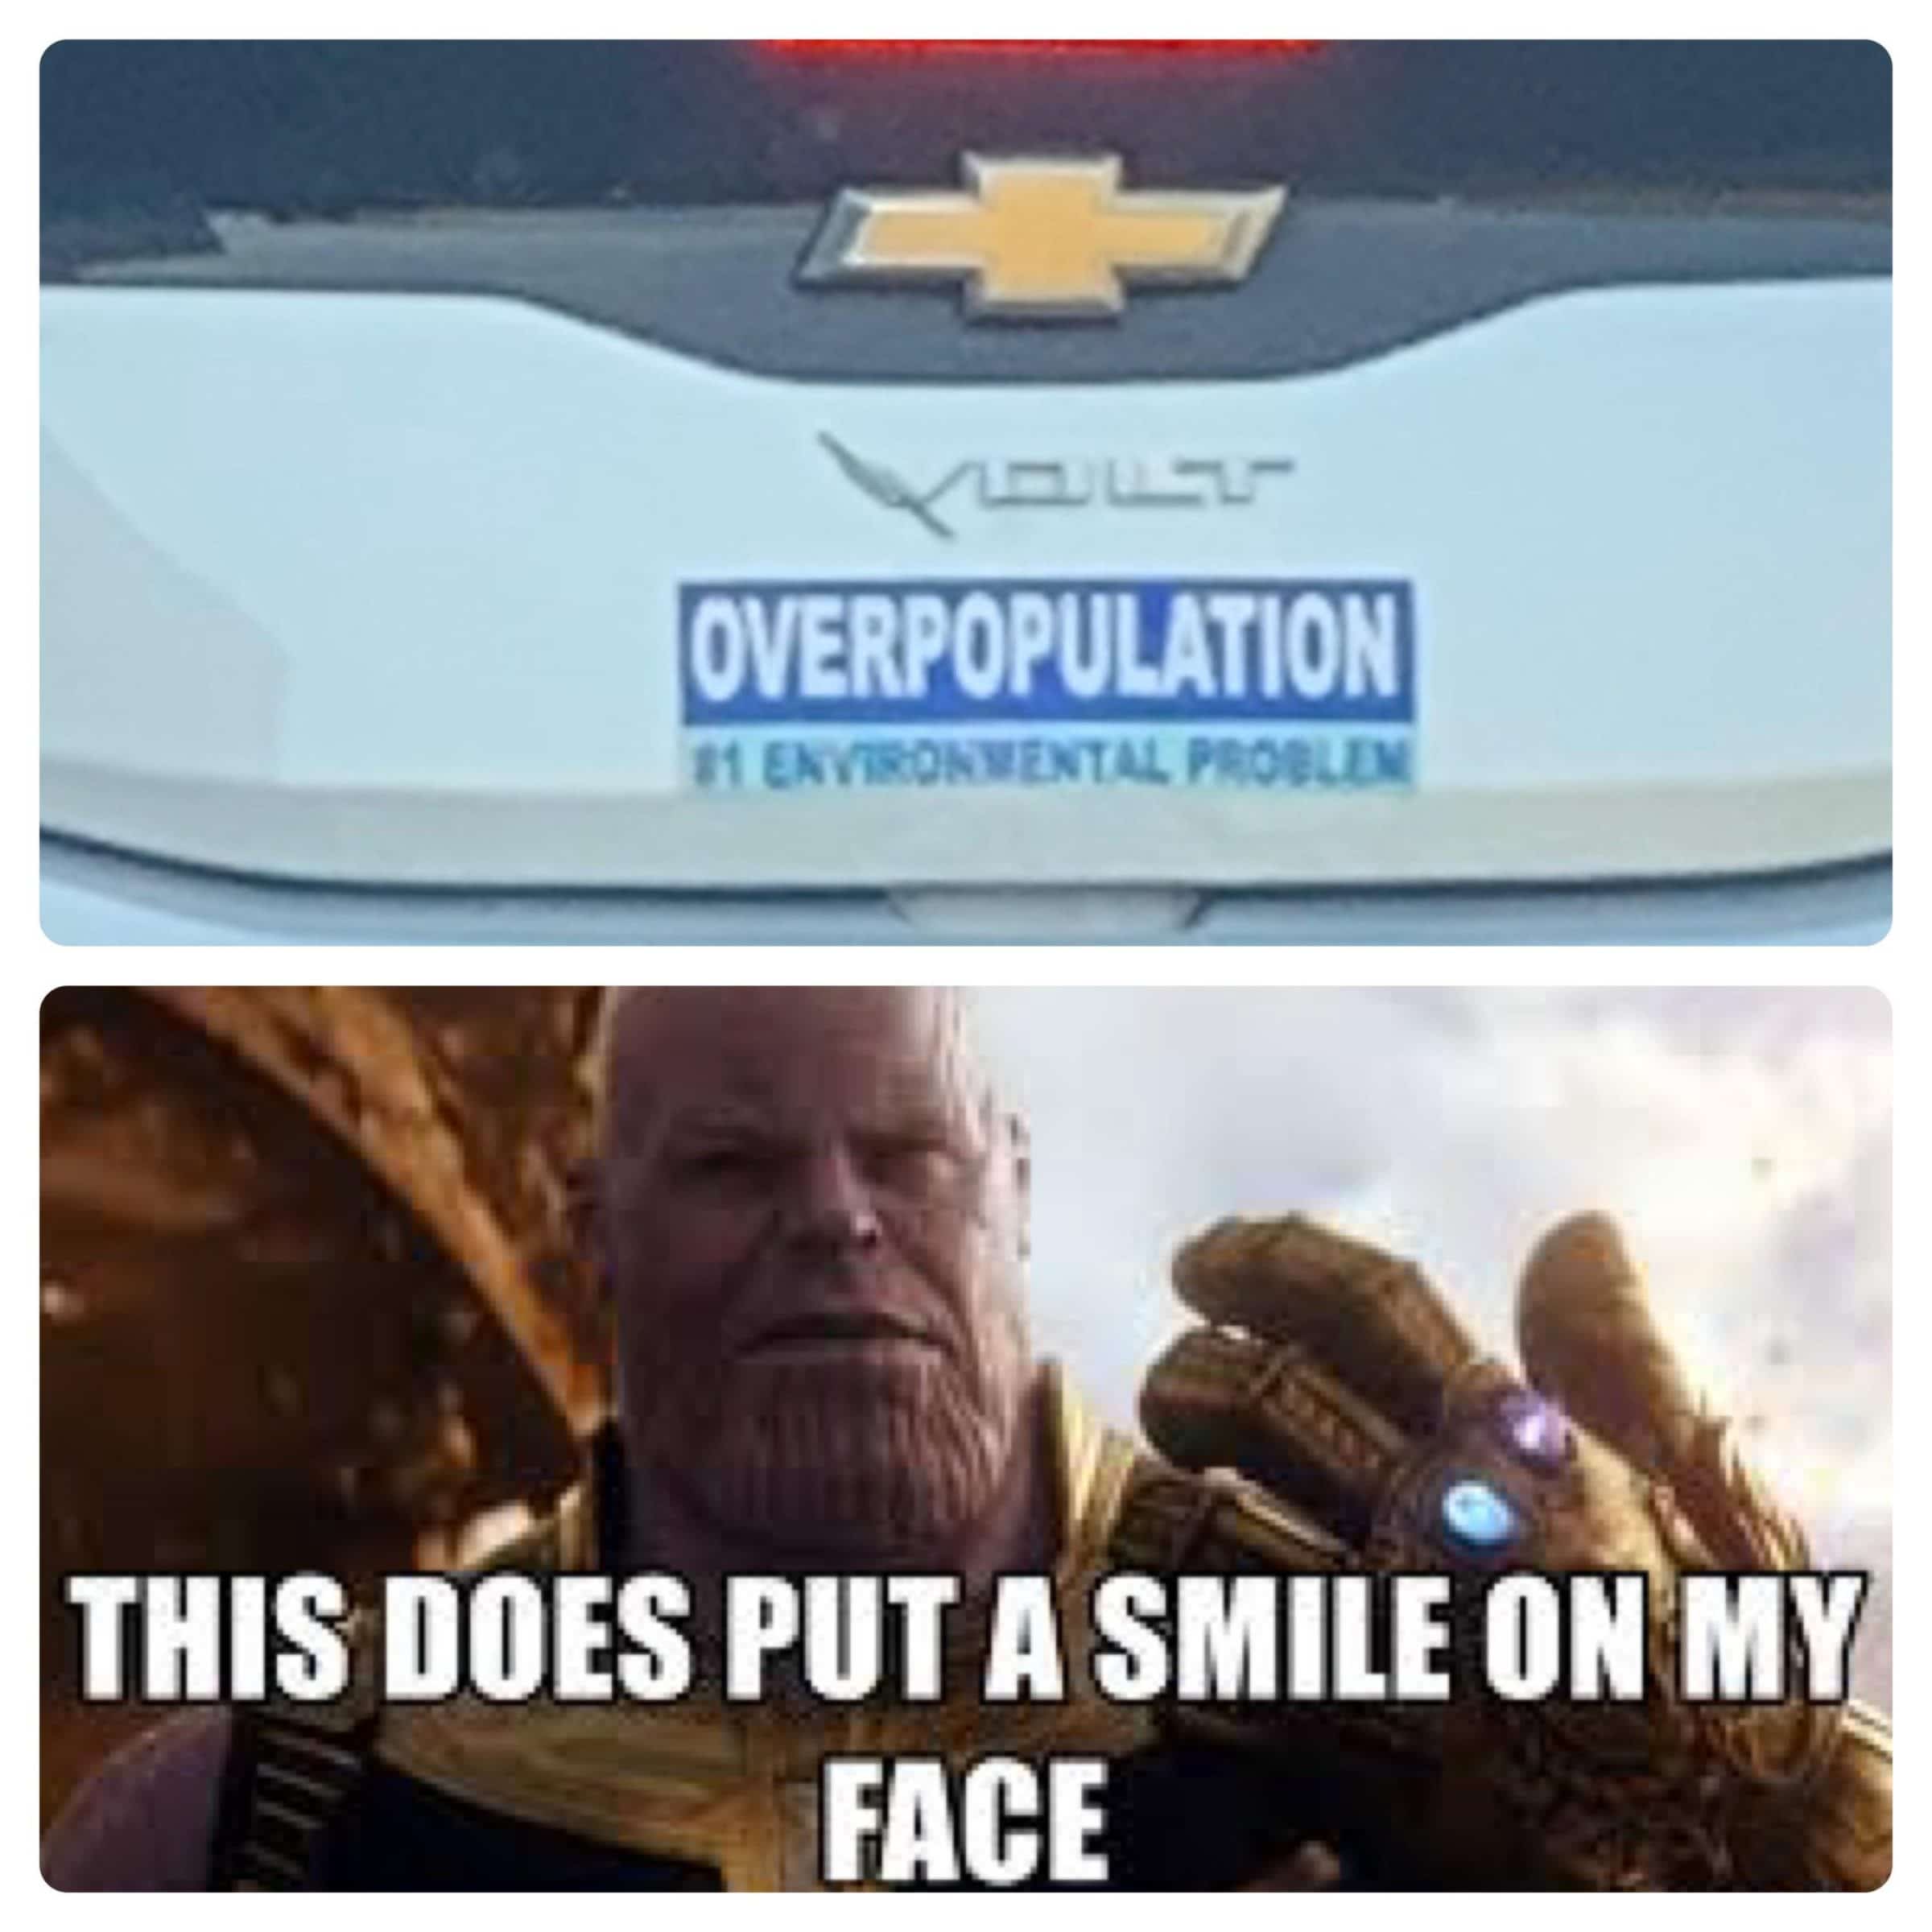 thanos avengers-memes thanos text: OVERPOPULATION THIS DOES PUT A SMILE ON MY FACE 